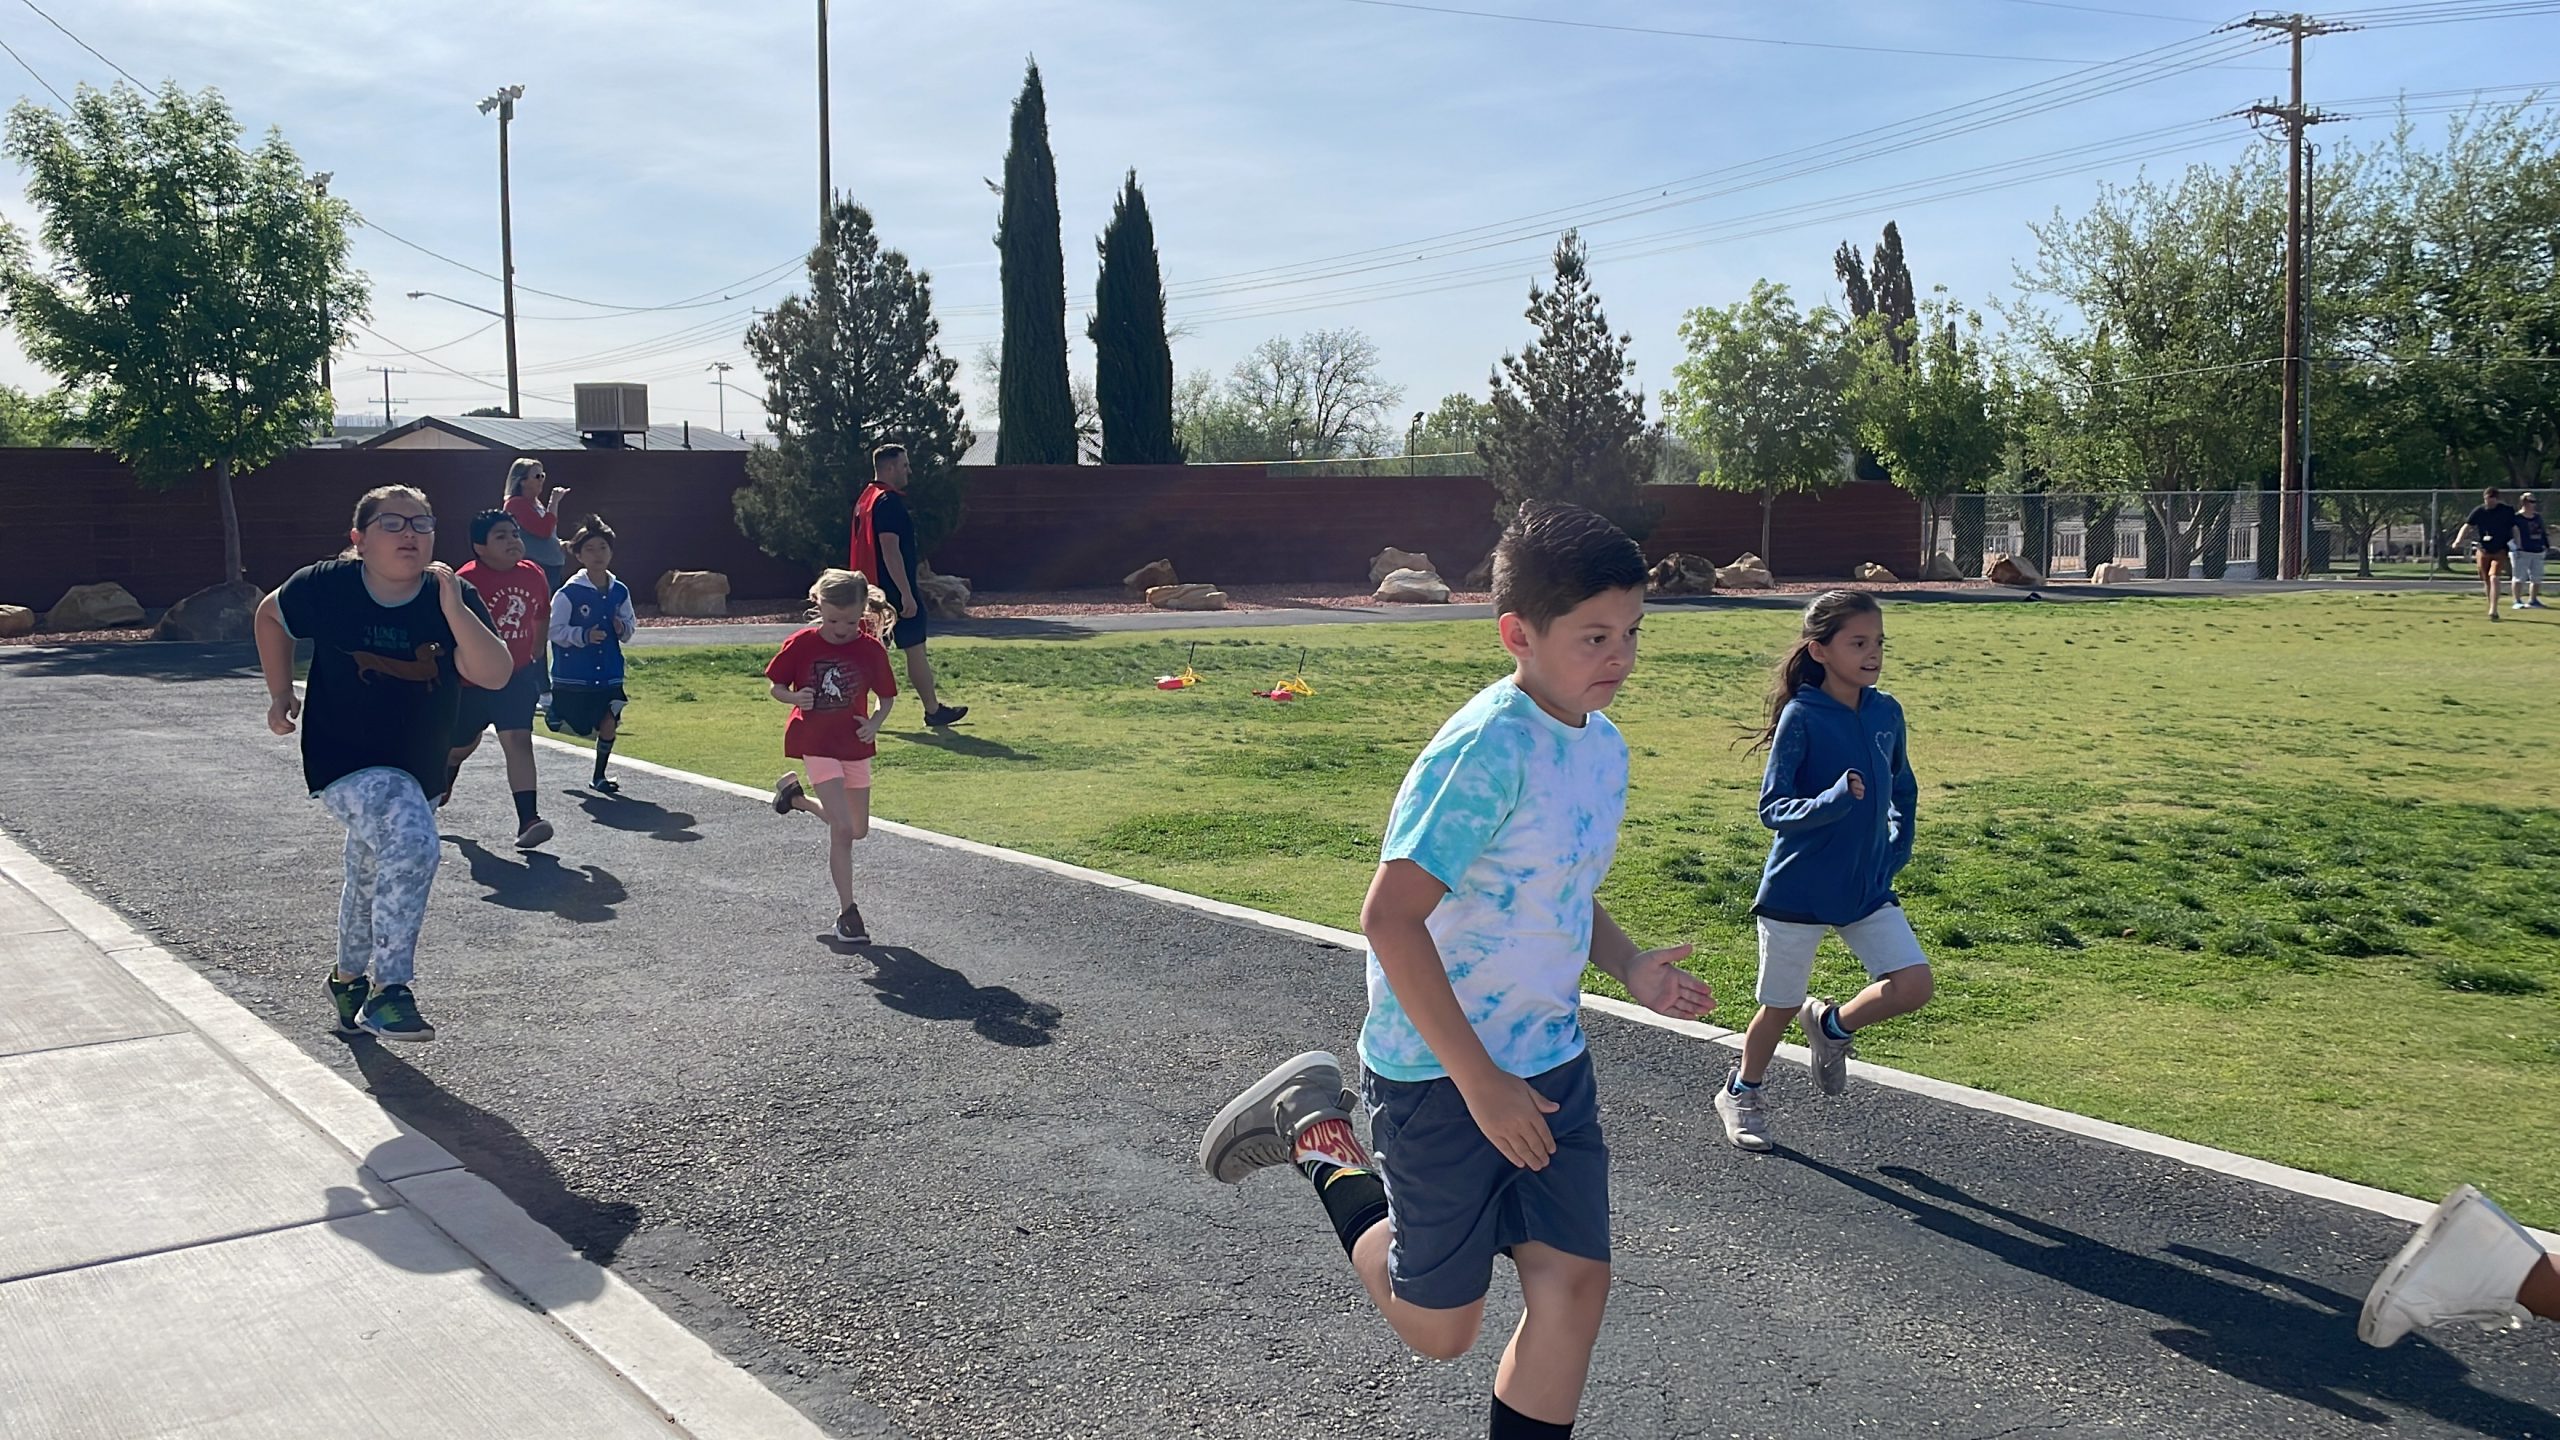 Students run laps to get ready for the IronKids run.